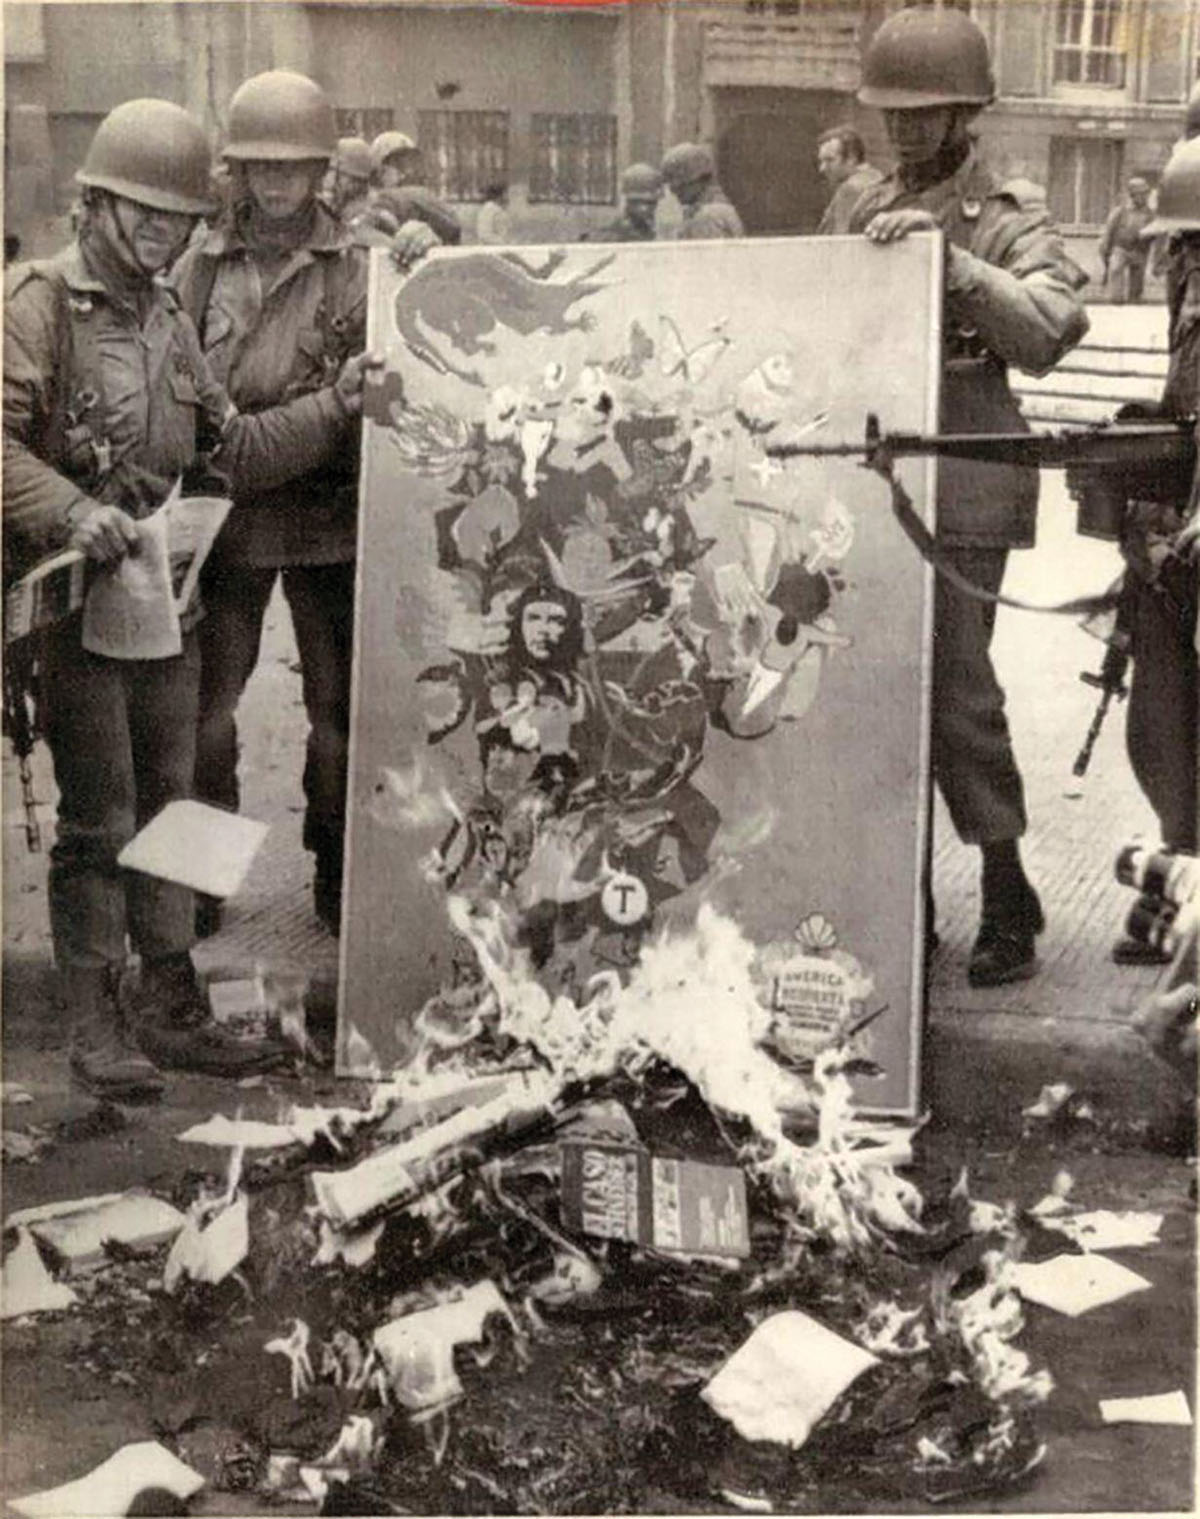 Soldiers burning Marxist literature in Chile, 1973 (Hum Images/Alamy)